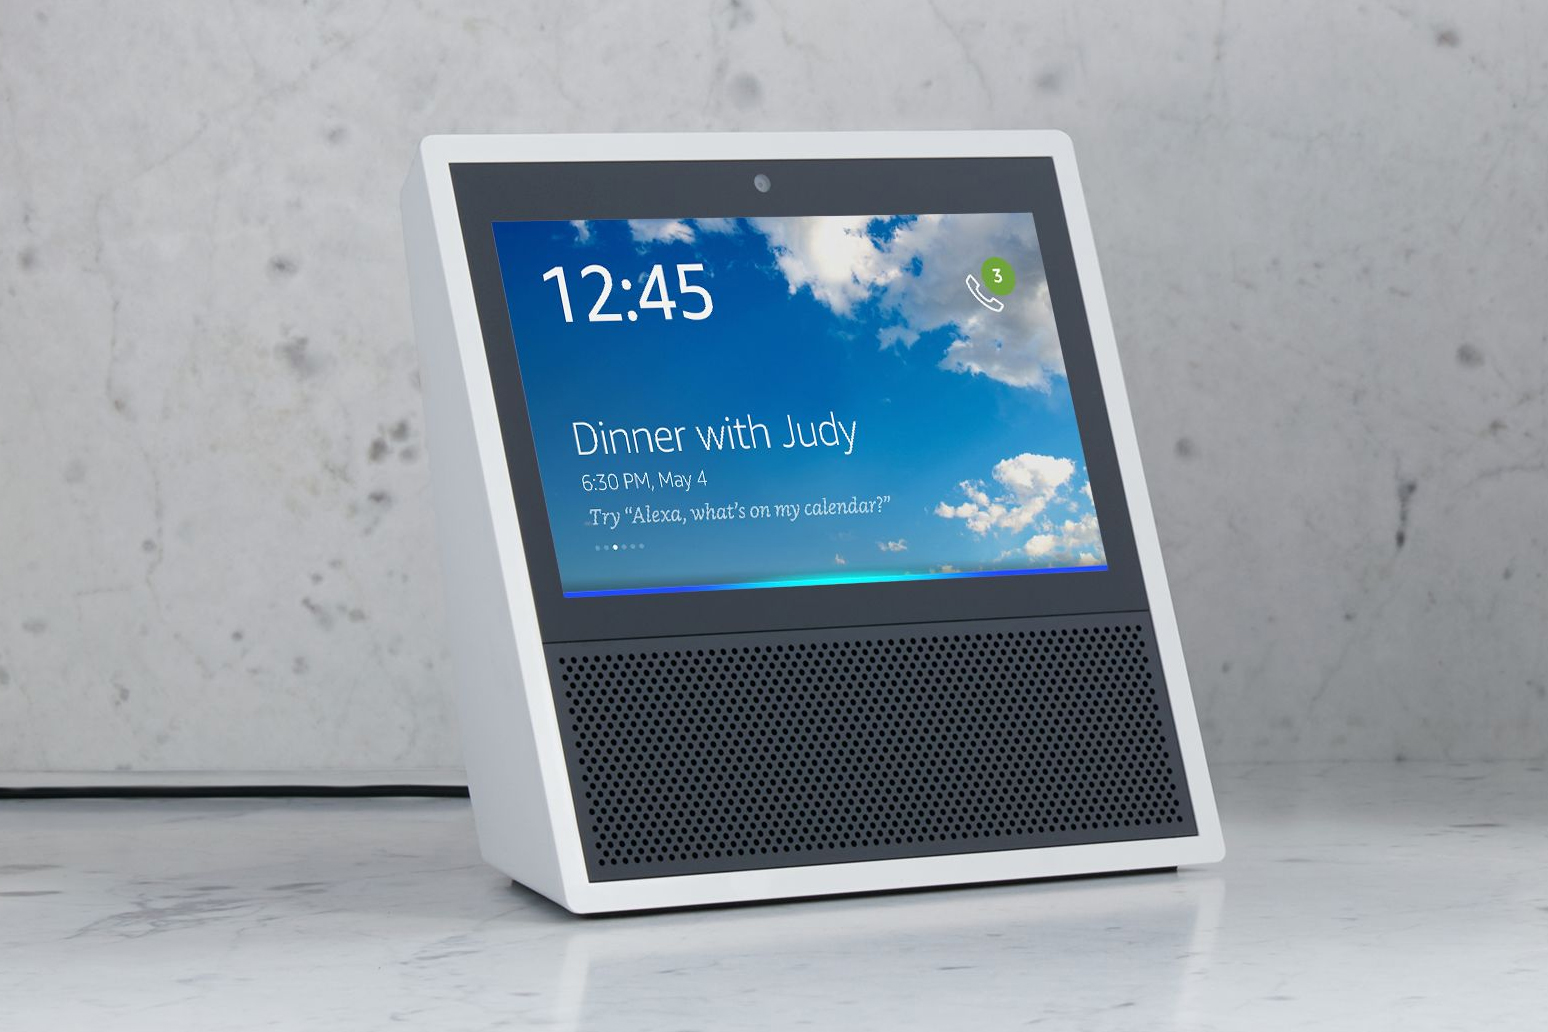 Facebook might launch 2 smart speakers by July to rival Apple, Amazon, Google